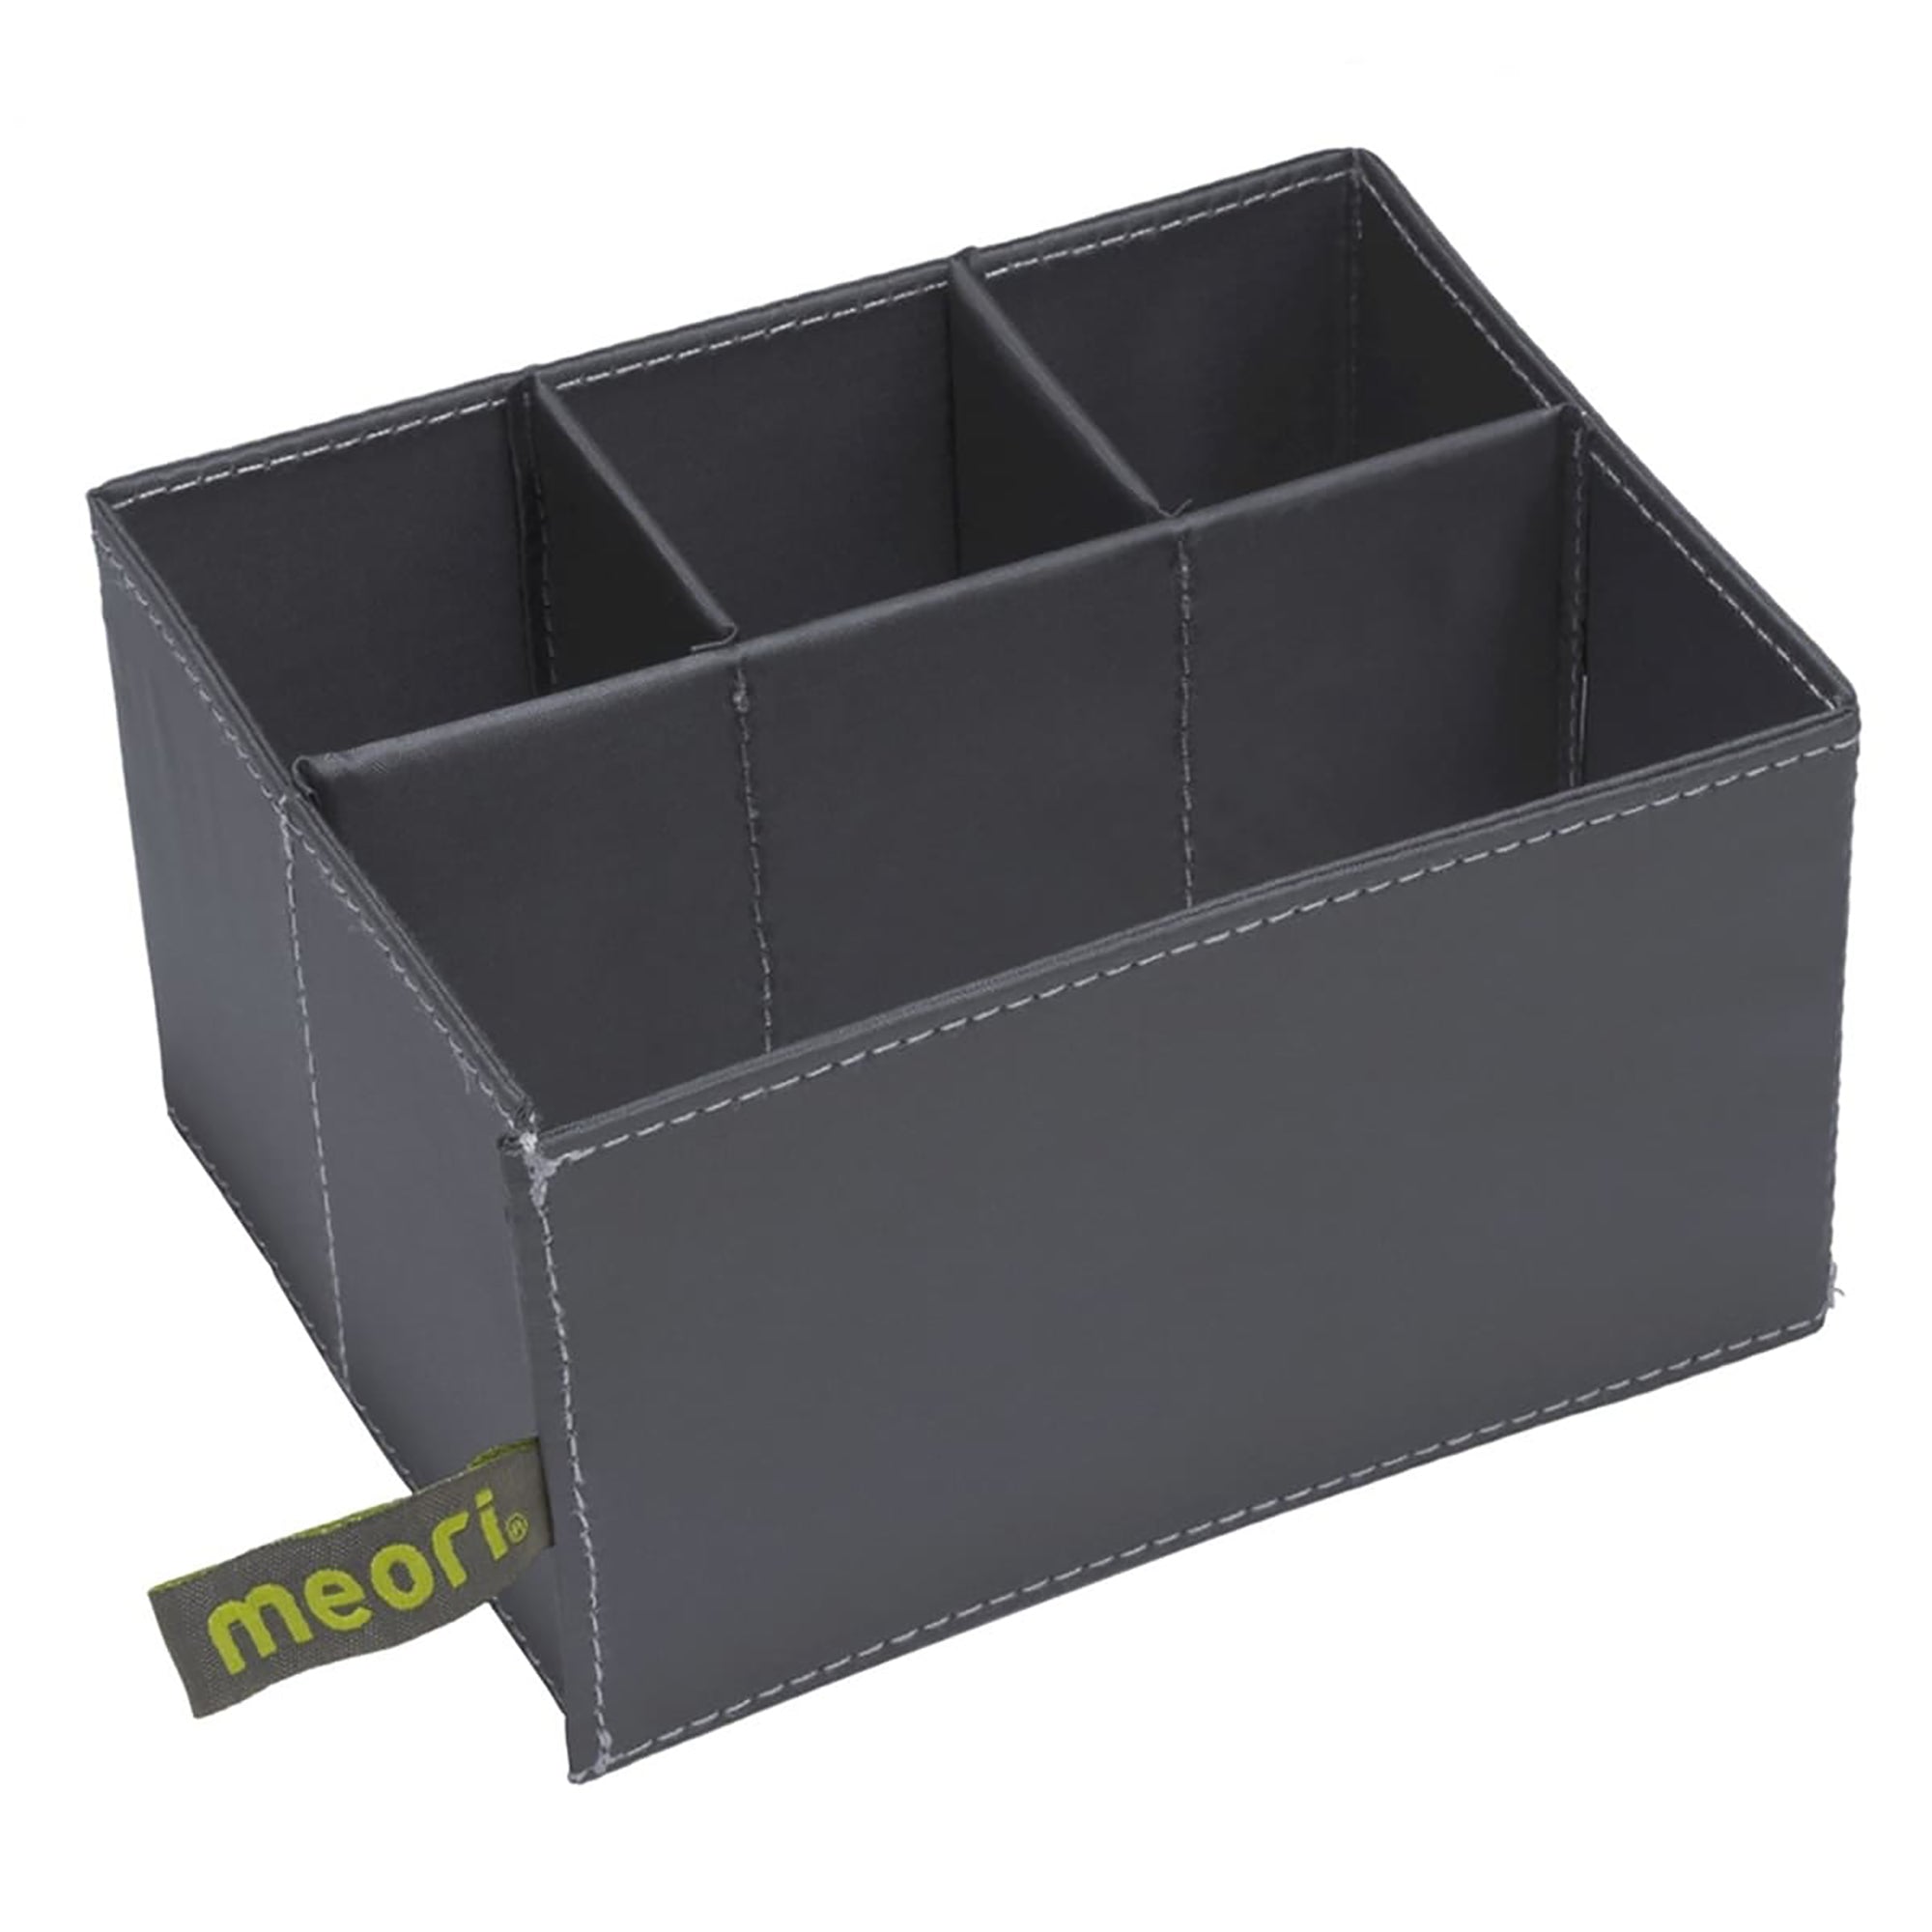 Navy blue Meori insert open with 1 long compartment and 3 small compartments.